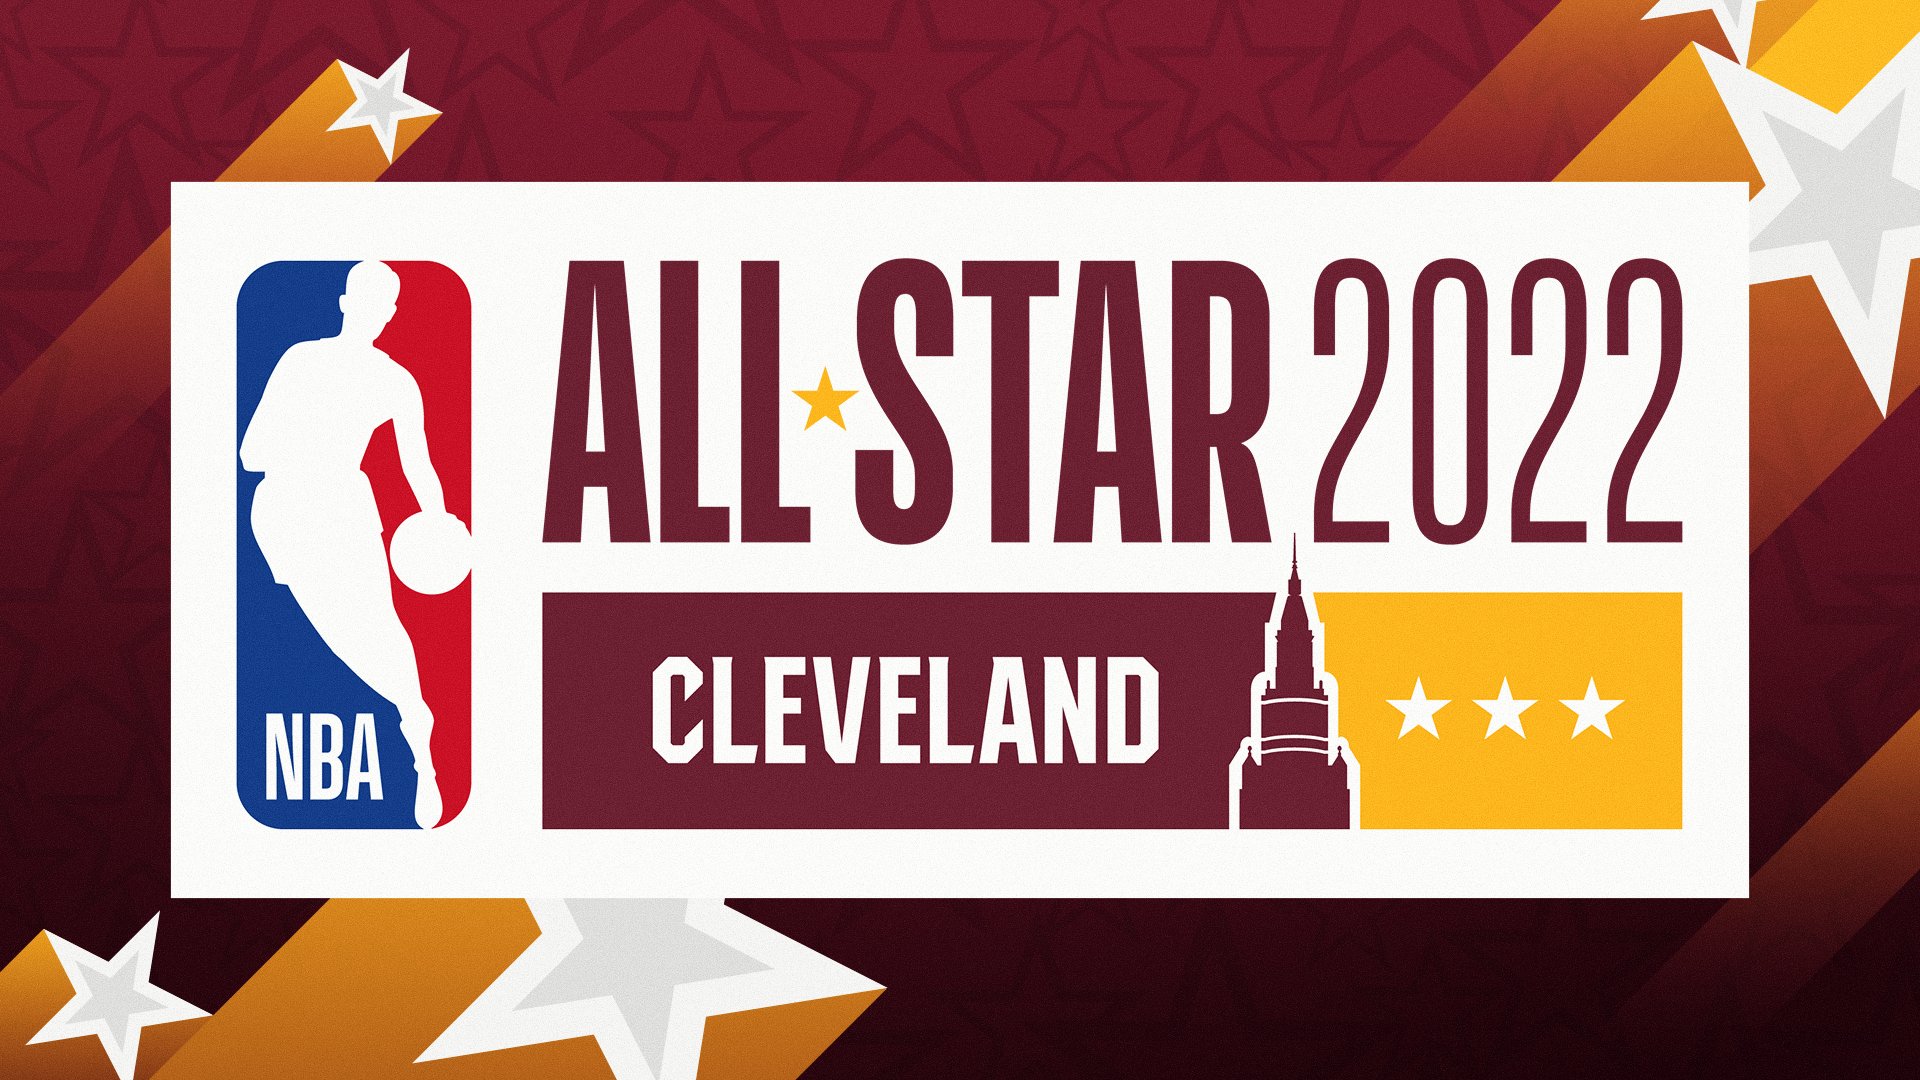 NBAAllStar #NBAAllStar 2022 Is In Cleveland, OH! The 71st Annual NBA All Star Game Will Be Played On Sunday, Feb. At Rocket Mortgage FieldHouse, Home Of The Cavaliers, During The